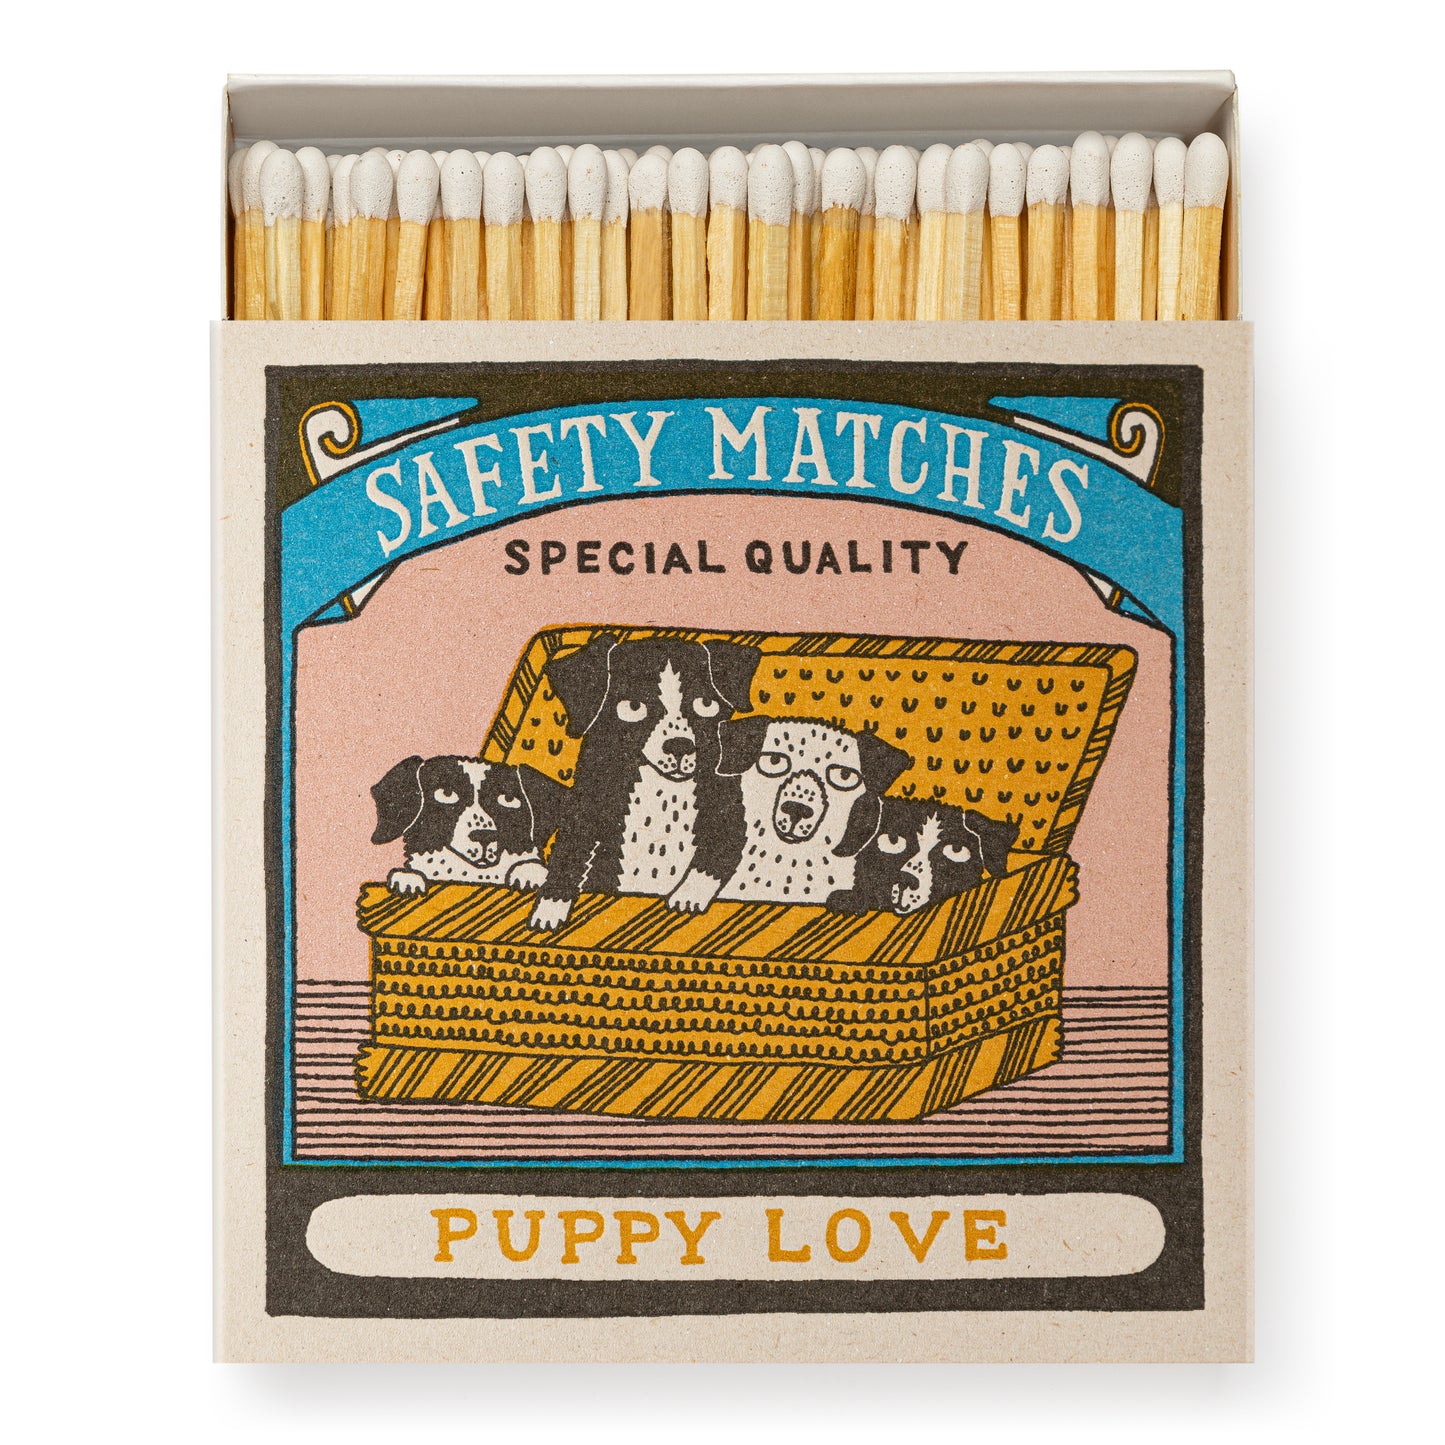 Puppy Love - Square Box Of Luxury Matches